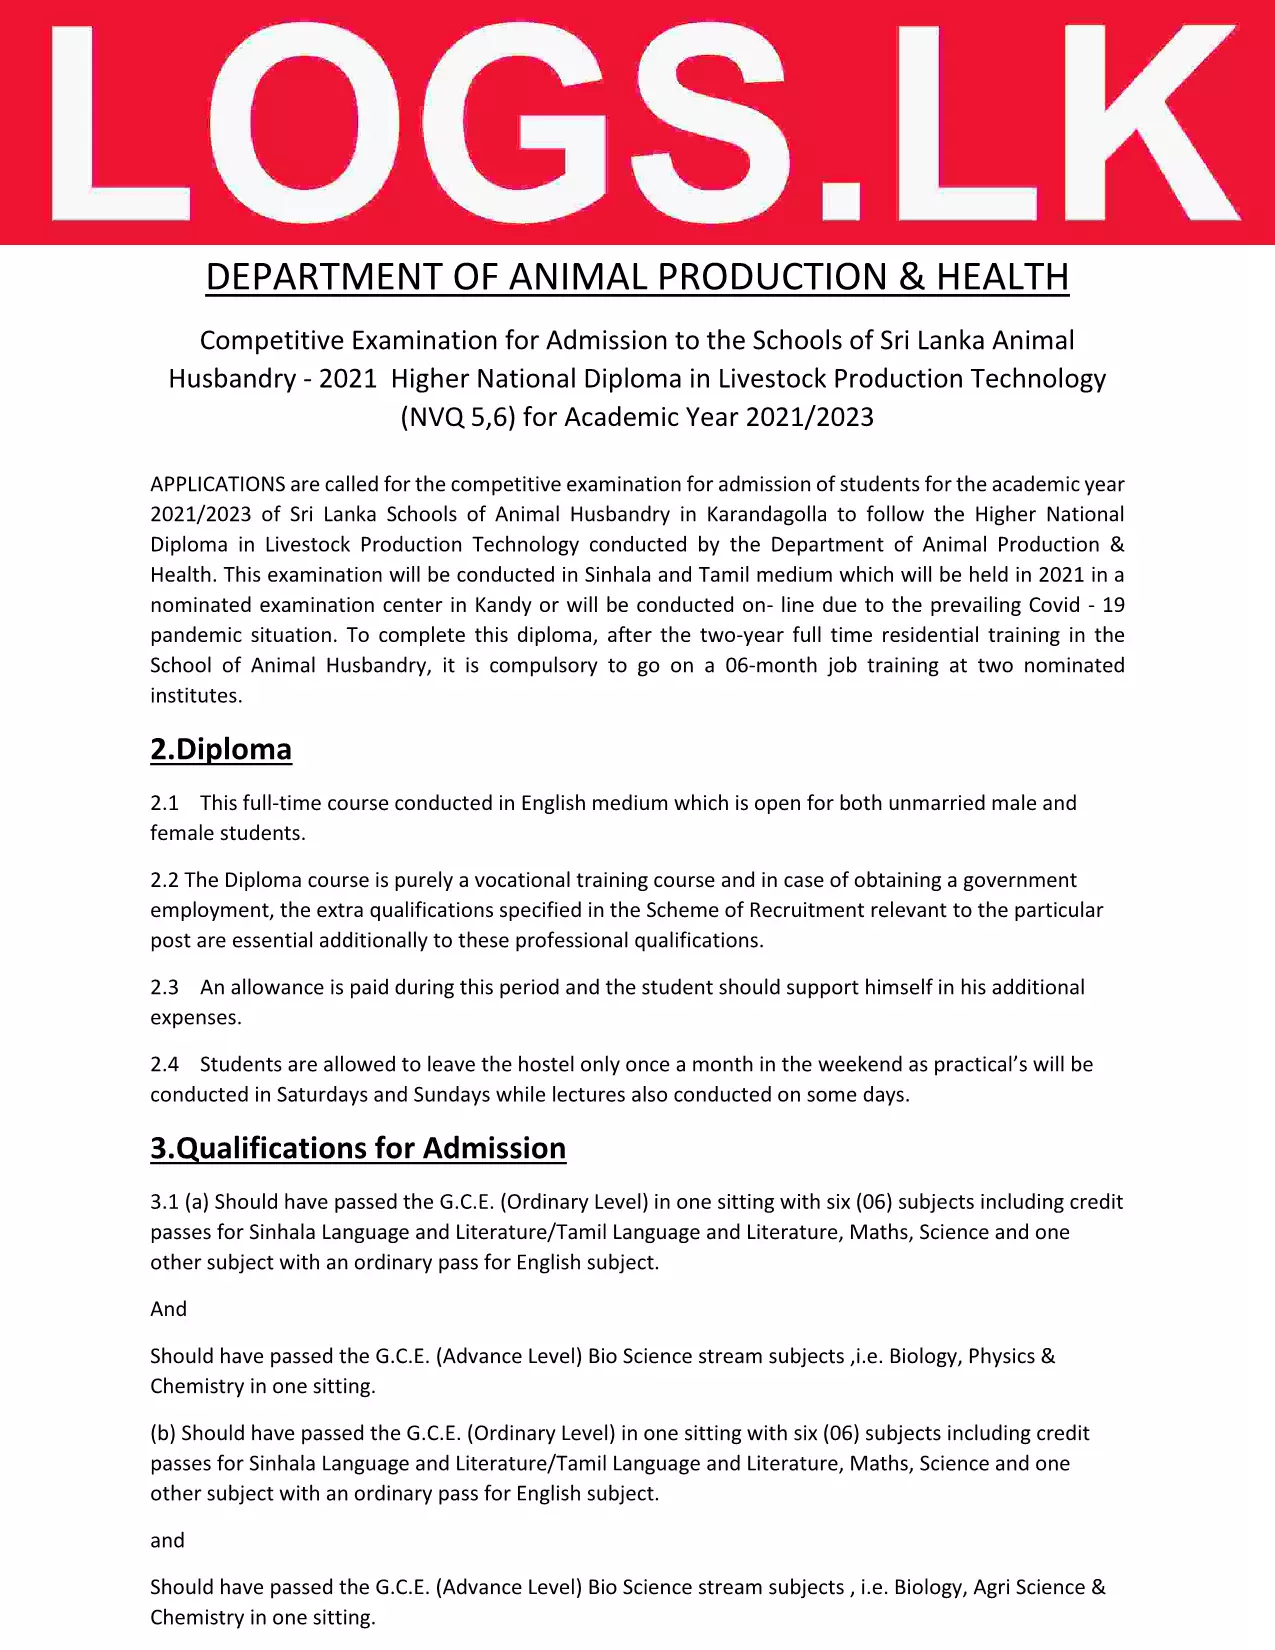 Department of Animal Production and Health Courses